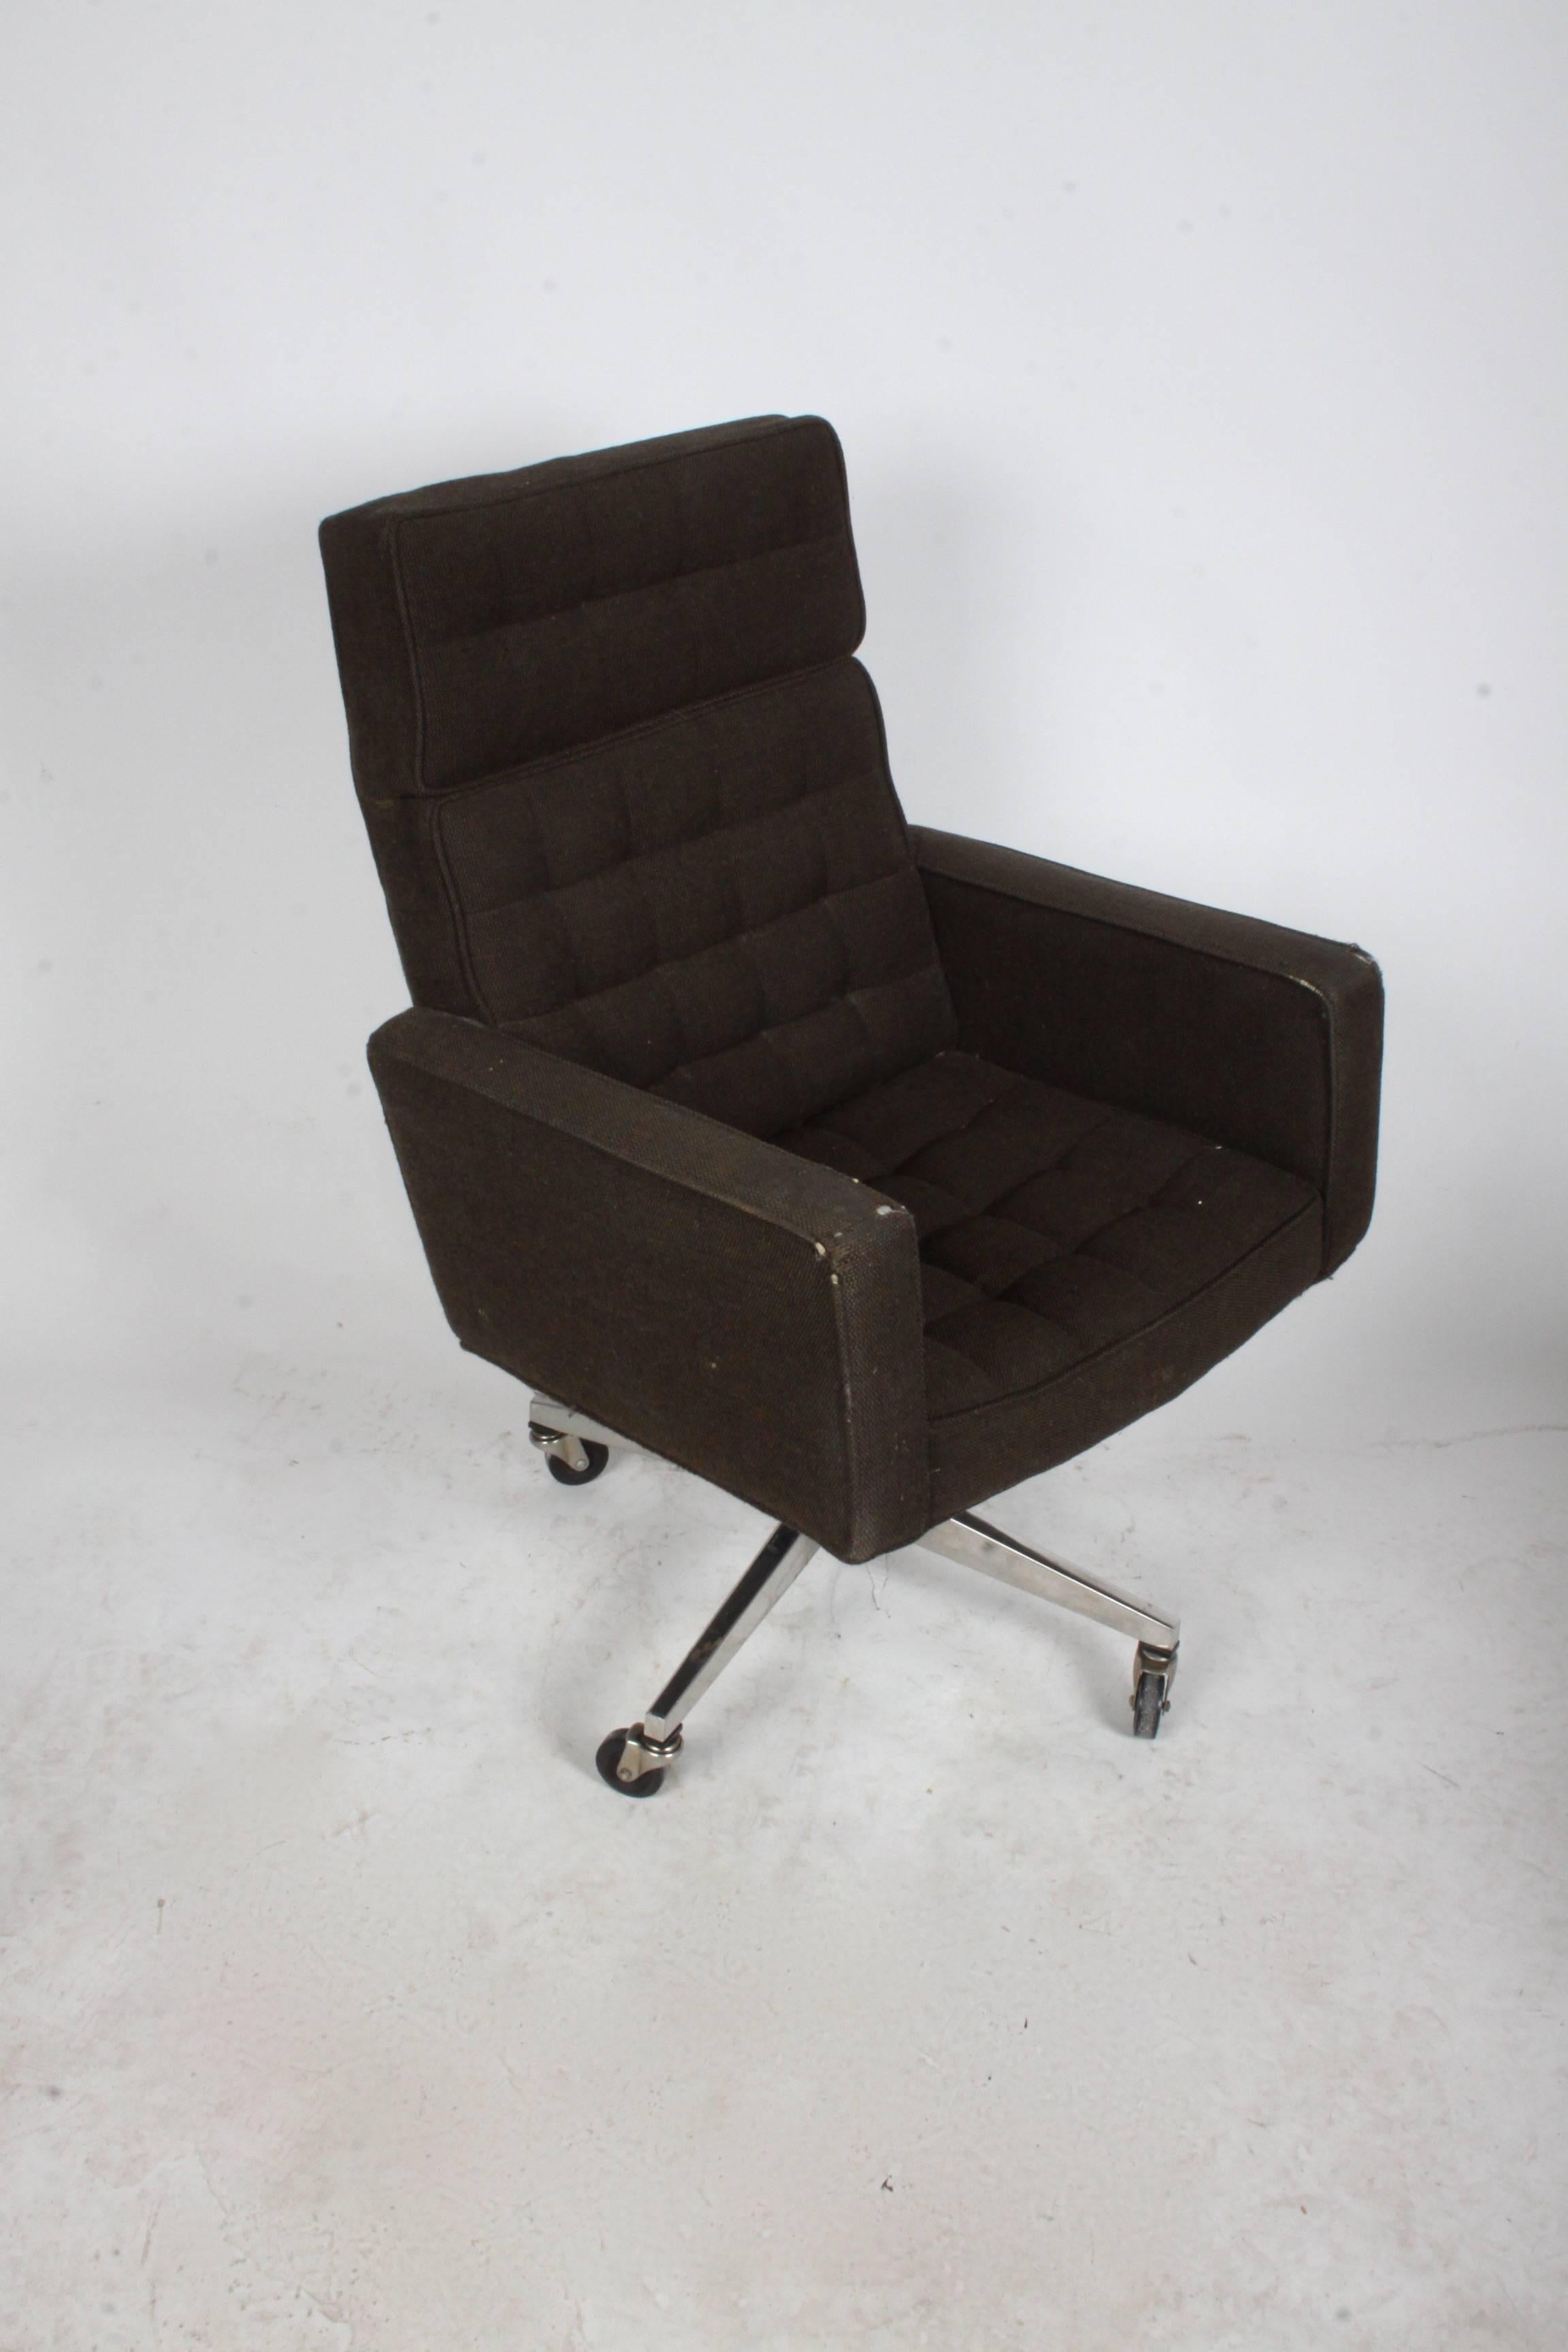 Out of production vintage Vincent Cafiero for Knoll executive desk chair in original fabric on castors. Attached tufted seat cushions in the style of Florence Knoll. Chair is in need of reupholstery, structurally fine. Tilt adjustment.